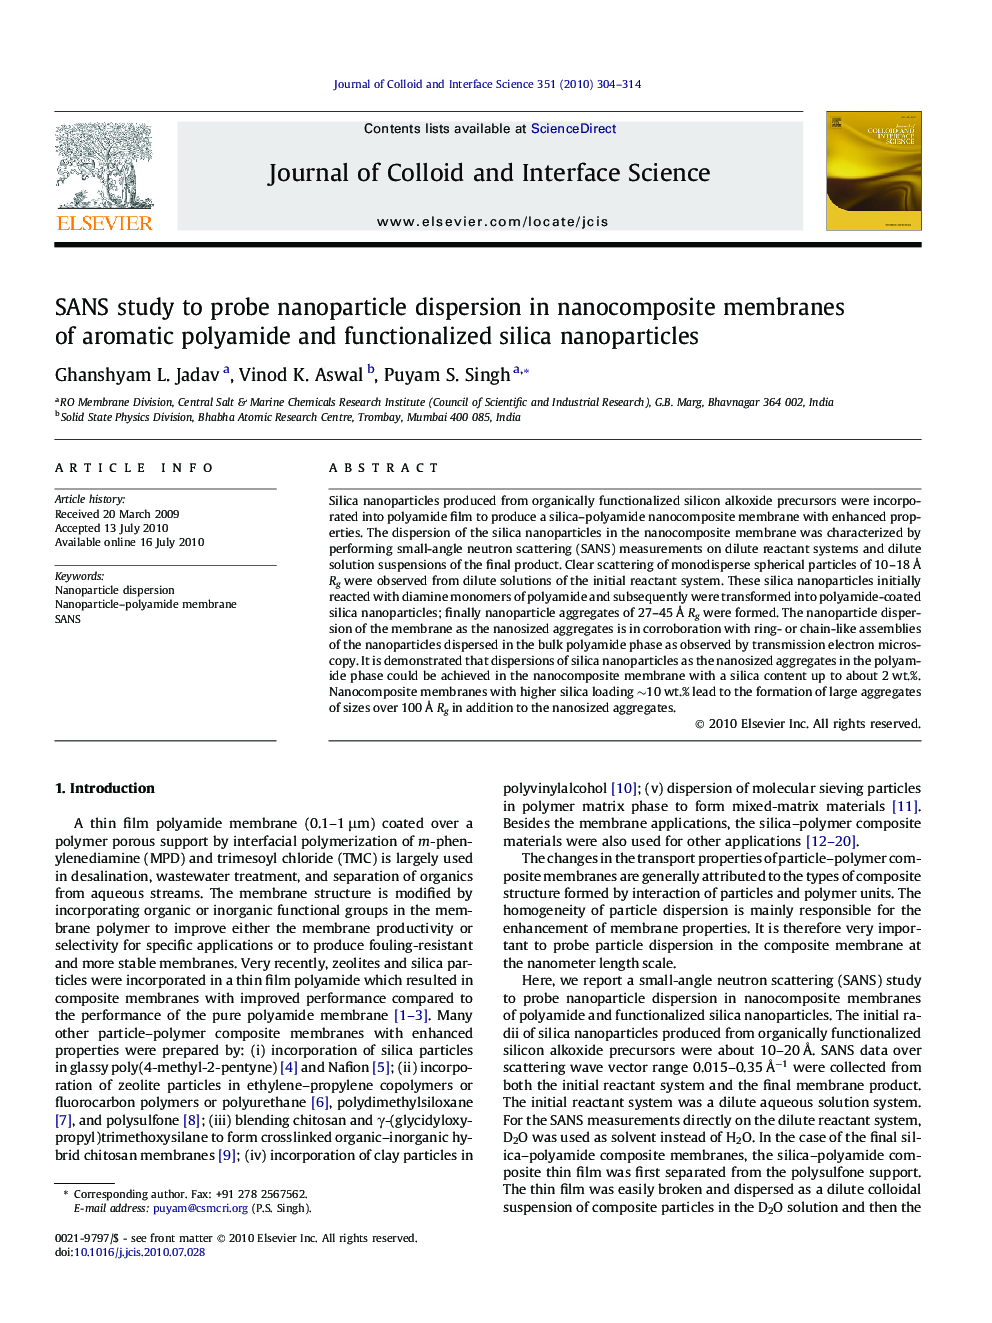 SANS study to probe nanoparticle dispersion in nanocomposite membranes of aromatic polyamide and functionalized silica nanoparticles